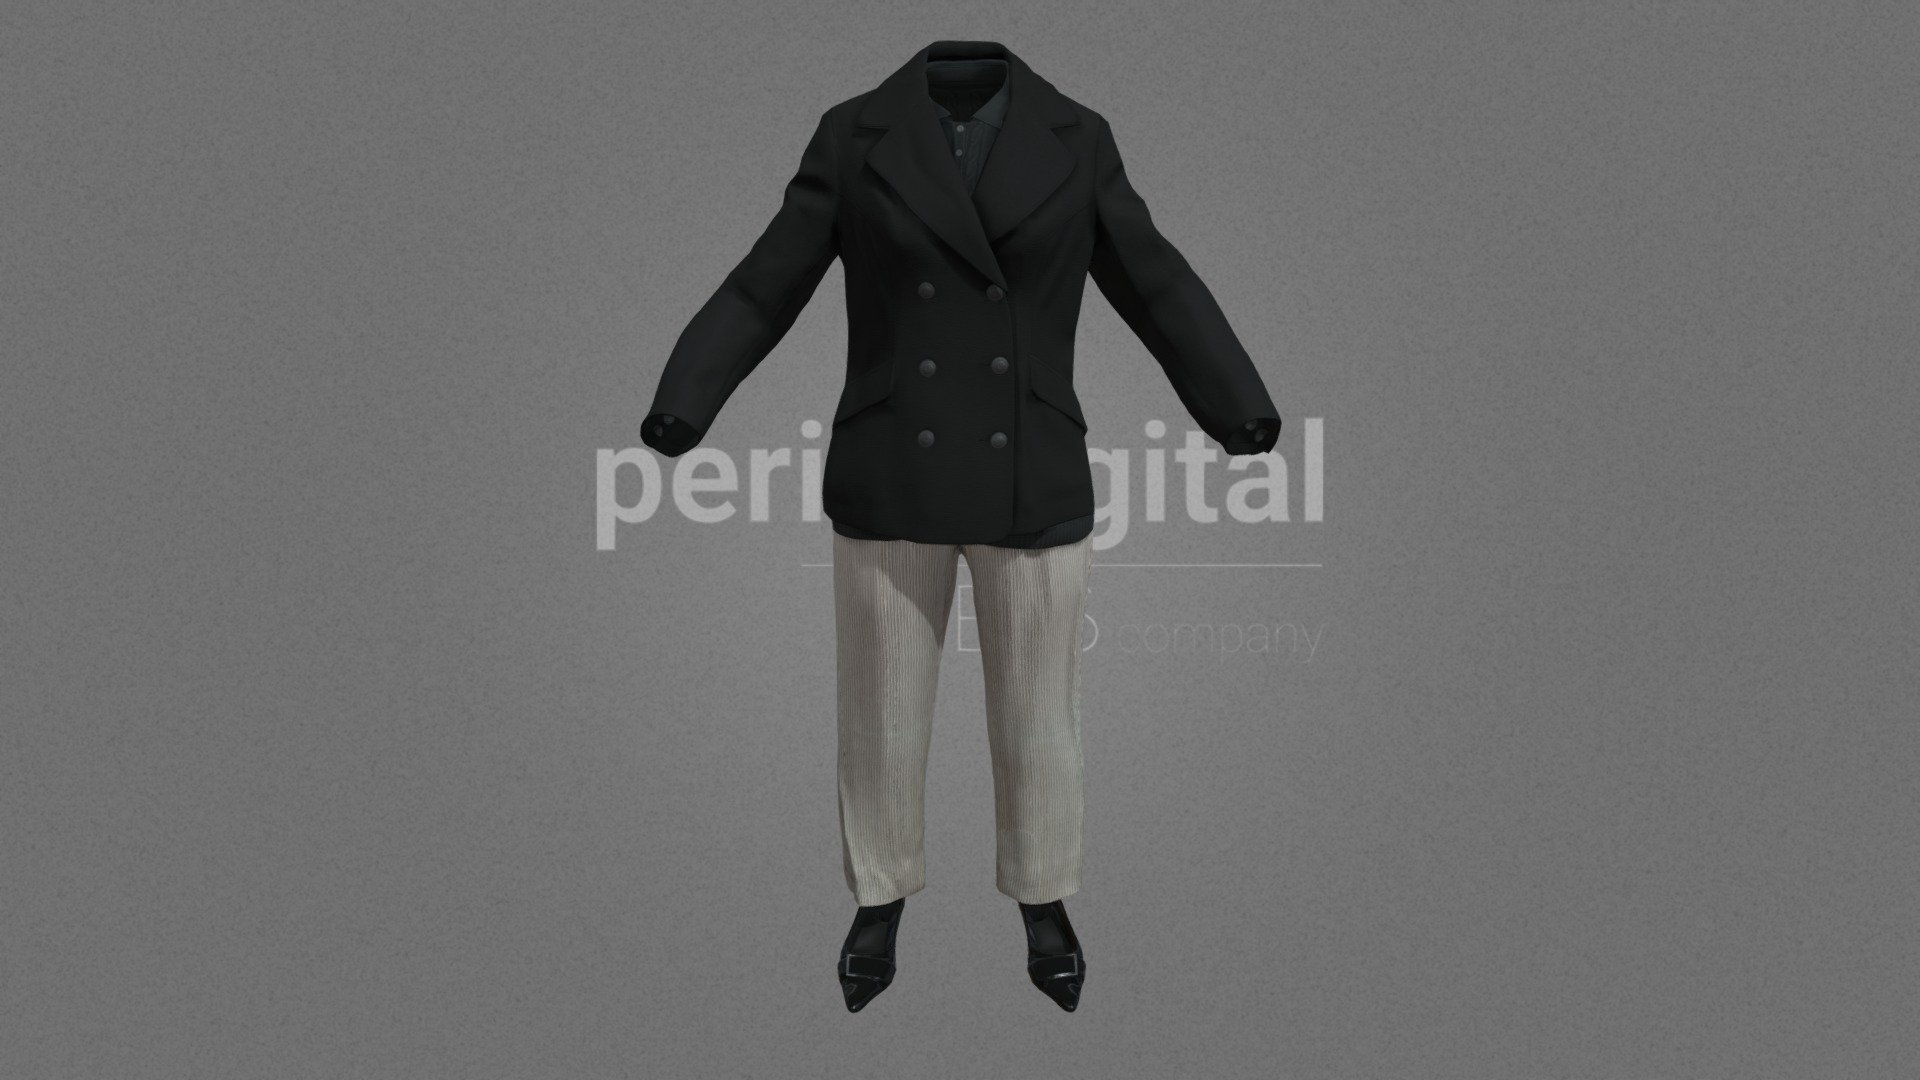 Black double breasted short coat, black cardigan with neck, white elegant trousers with black stripes, black elegant shoes with short shoes.

PERIS DIGITAL HIGH QUALITY 3D CLOTHING They are optimized for use in medium/high poly 3D scenes and optimized for rendering. We do not include characters, but they are positioned for you to include and adjust your own character. They have a LOW Poly Mesh (LODRIG) inside the Blender file (included in the AdditionalFiles), which you can use for vertex weighting or cloth simulation and thus, make the transfer of vertices or property masks from the LOW to the HIGH model. We have included in Additional Files, the texture maps in high resolution, as well as the Displacement maps in high resolution too, so you can perform extreme point of view with your 3D cameras. With the Blender file (included in AdditionalFiles) you will be able to edit any aspect of the set . Enjoy it!

Web: https://peris.digital/ - 80s Fashion Series - Woman 37 - 3D model by Peris Digital (@perisdigital) 3d model